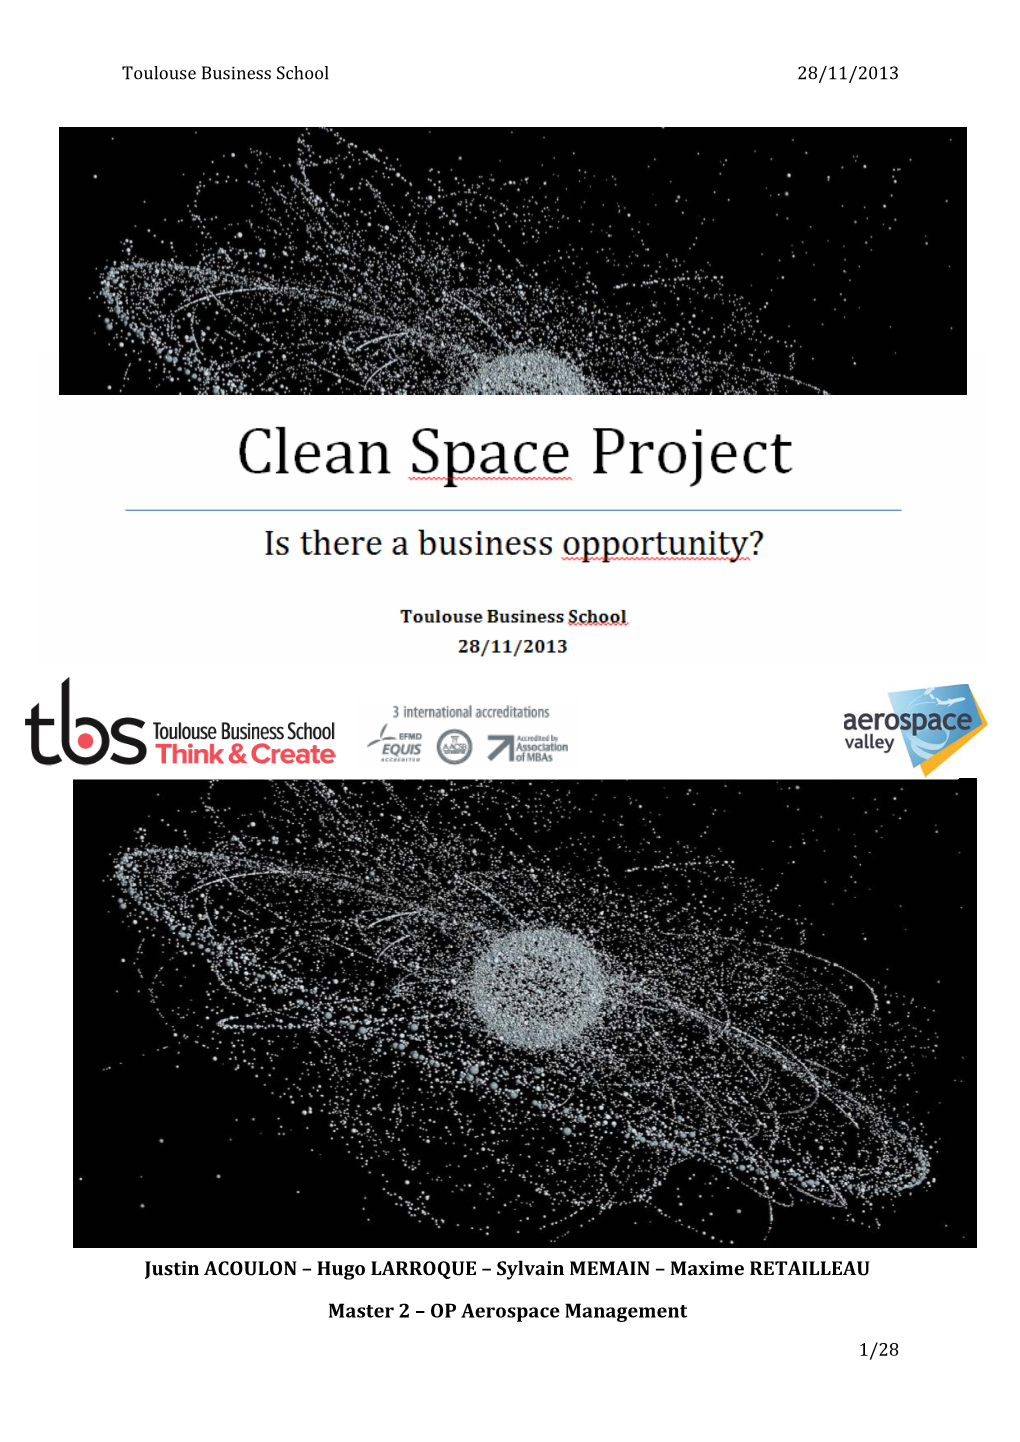 Clean Space Project: Is There a Business Opportunity?